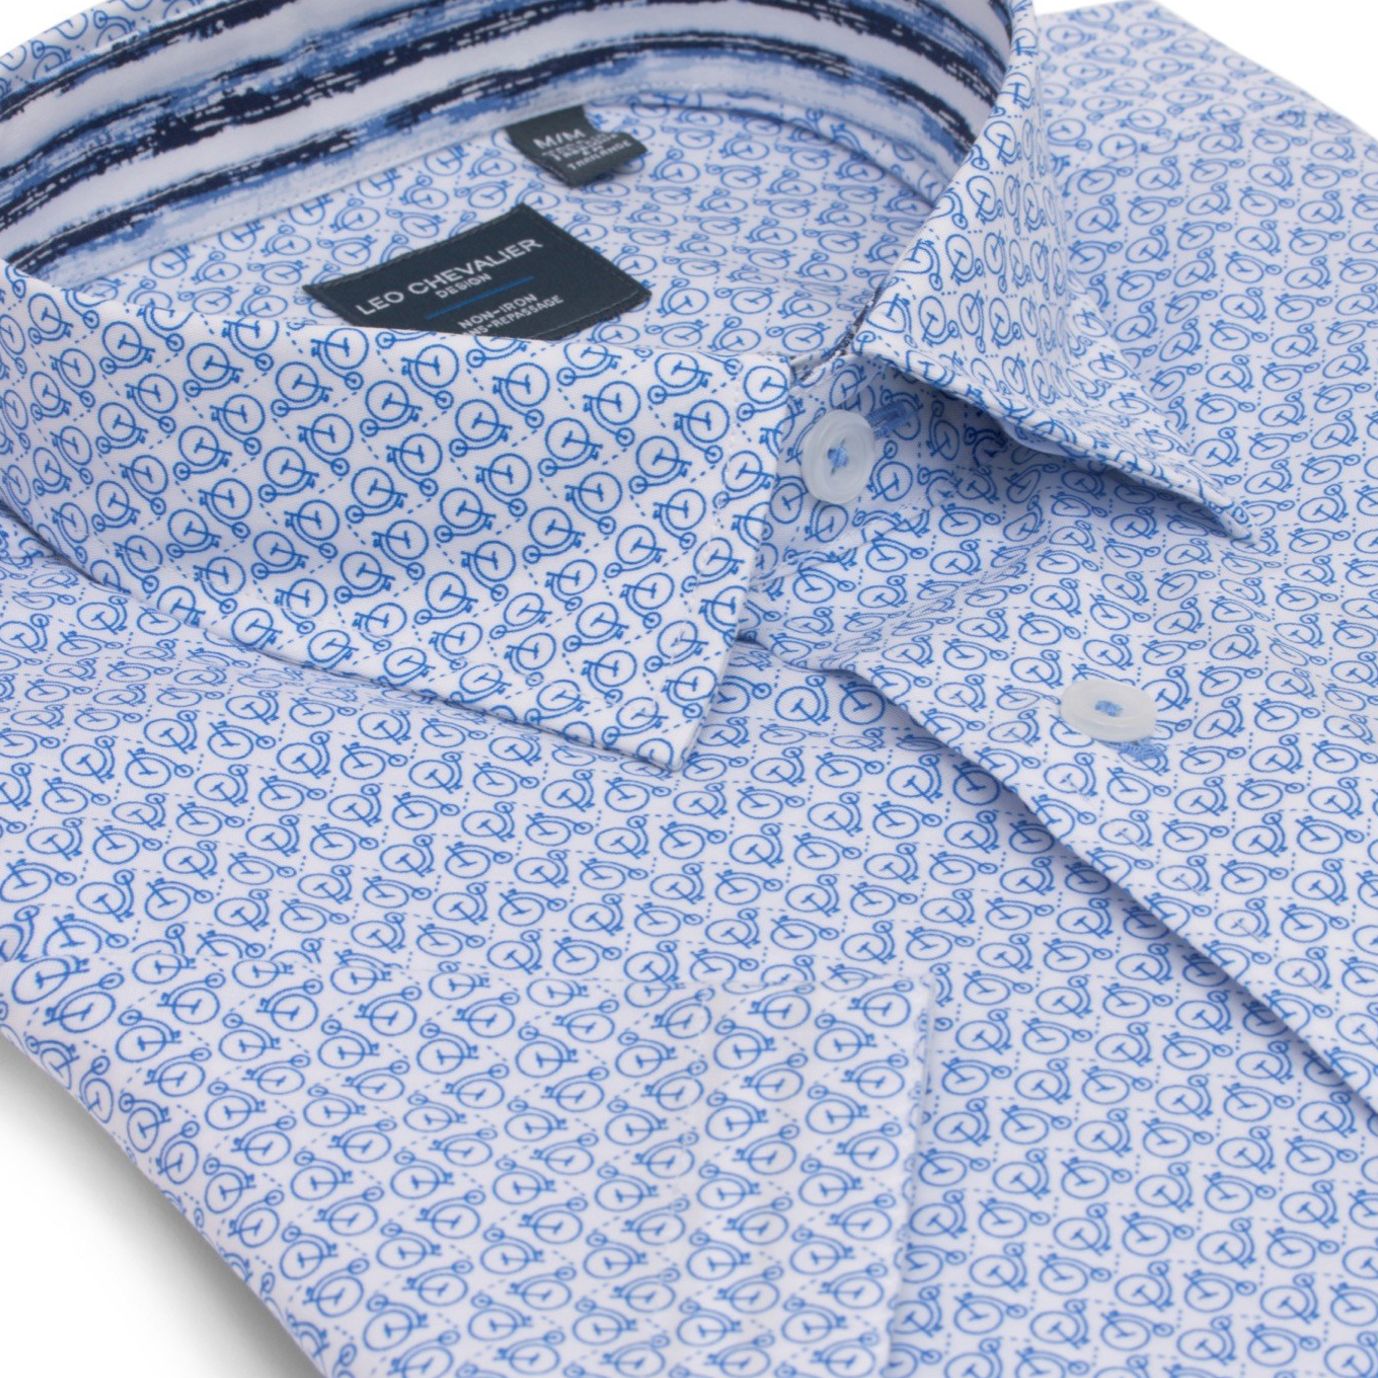 Blue Penny Farthing Print Short Sleeve No-Iron Cotton Sport Shirt with Hidden Button Down Collar by Leo Chevalier